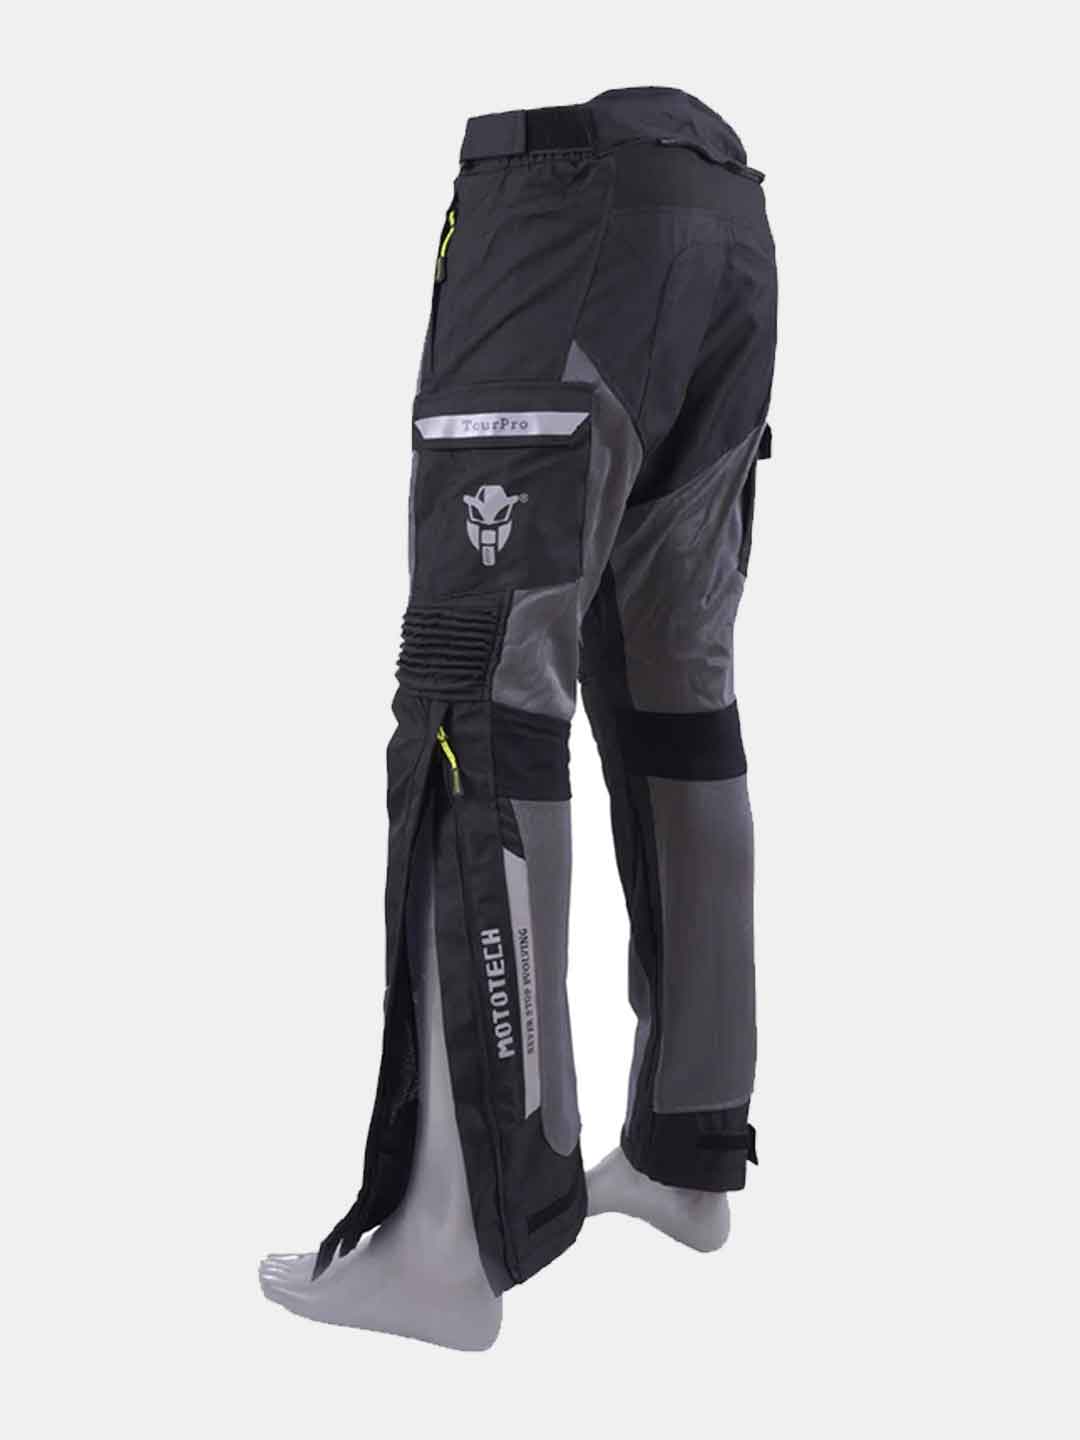 TVS Racing Black Grey Red Line Level 2 Riding Pant | Buy online in India